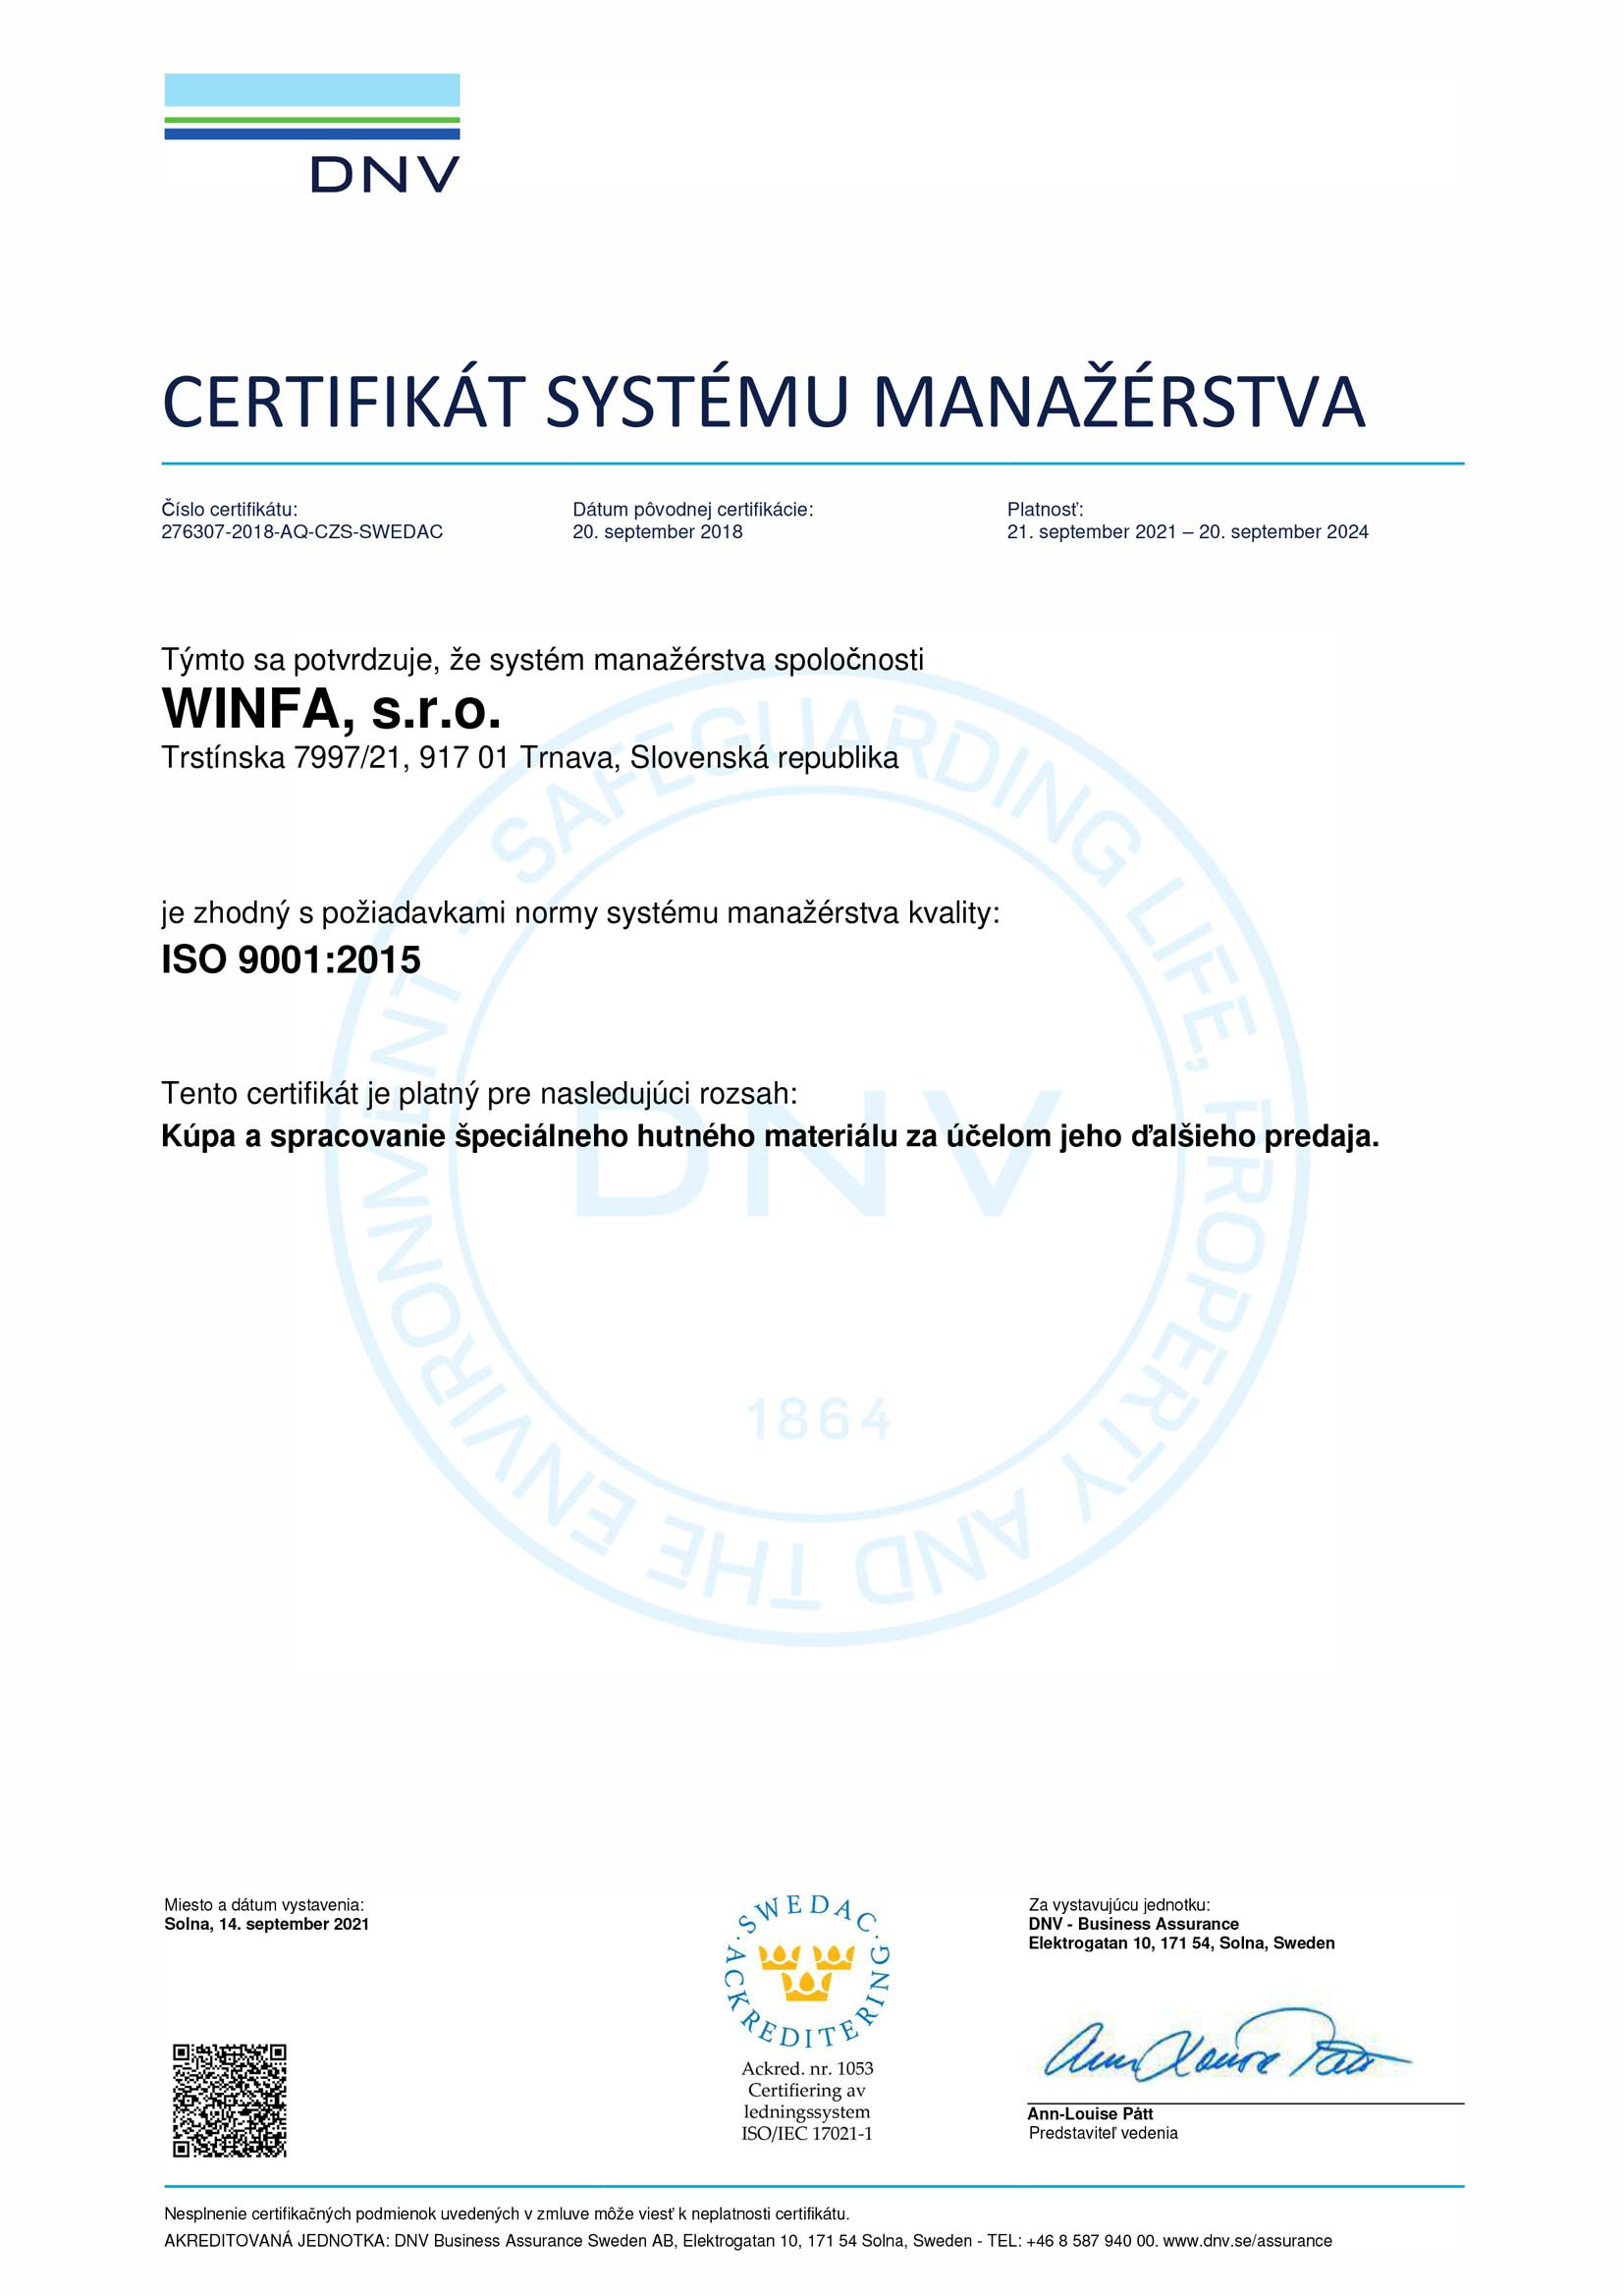 Management system certificate | winfa.sk